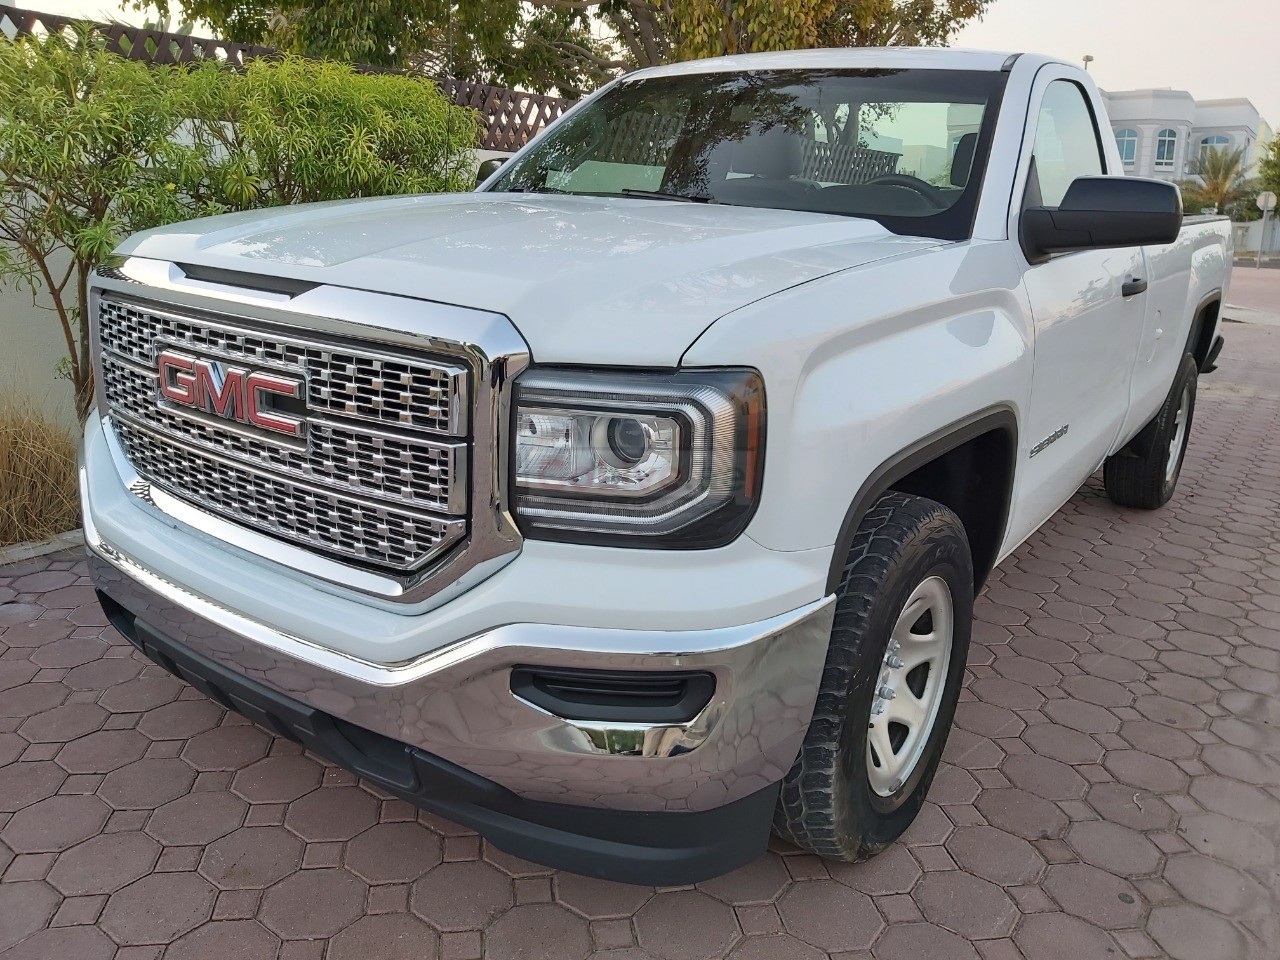 GMC SIERRA 2016,2WD,FRESH IMPORT,PERFECT CONDITION